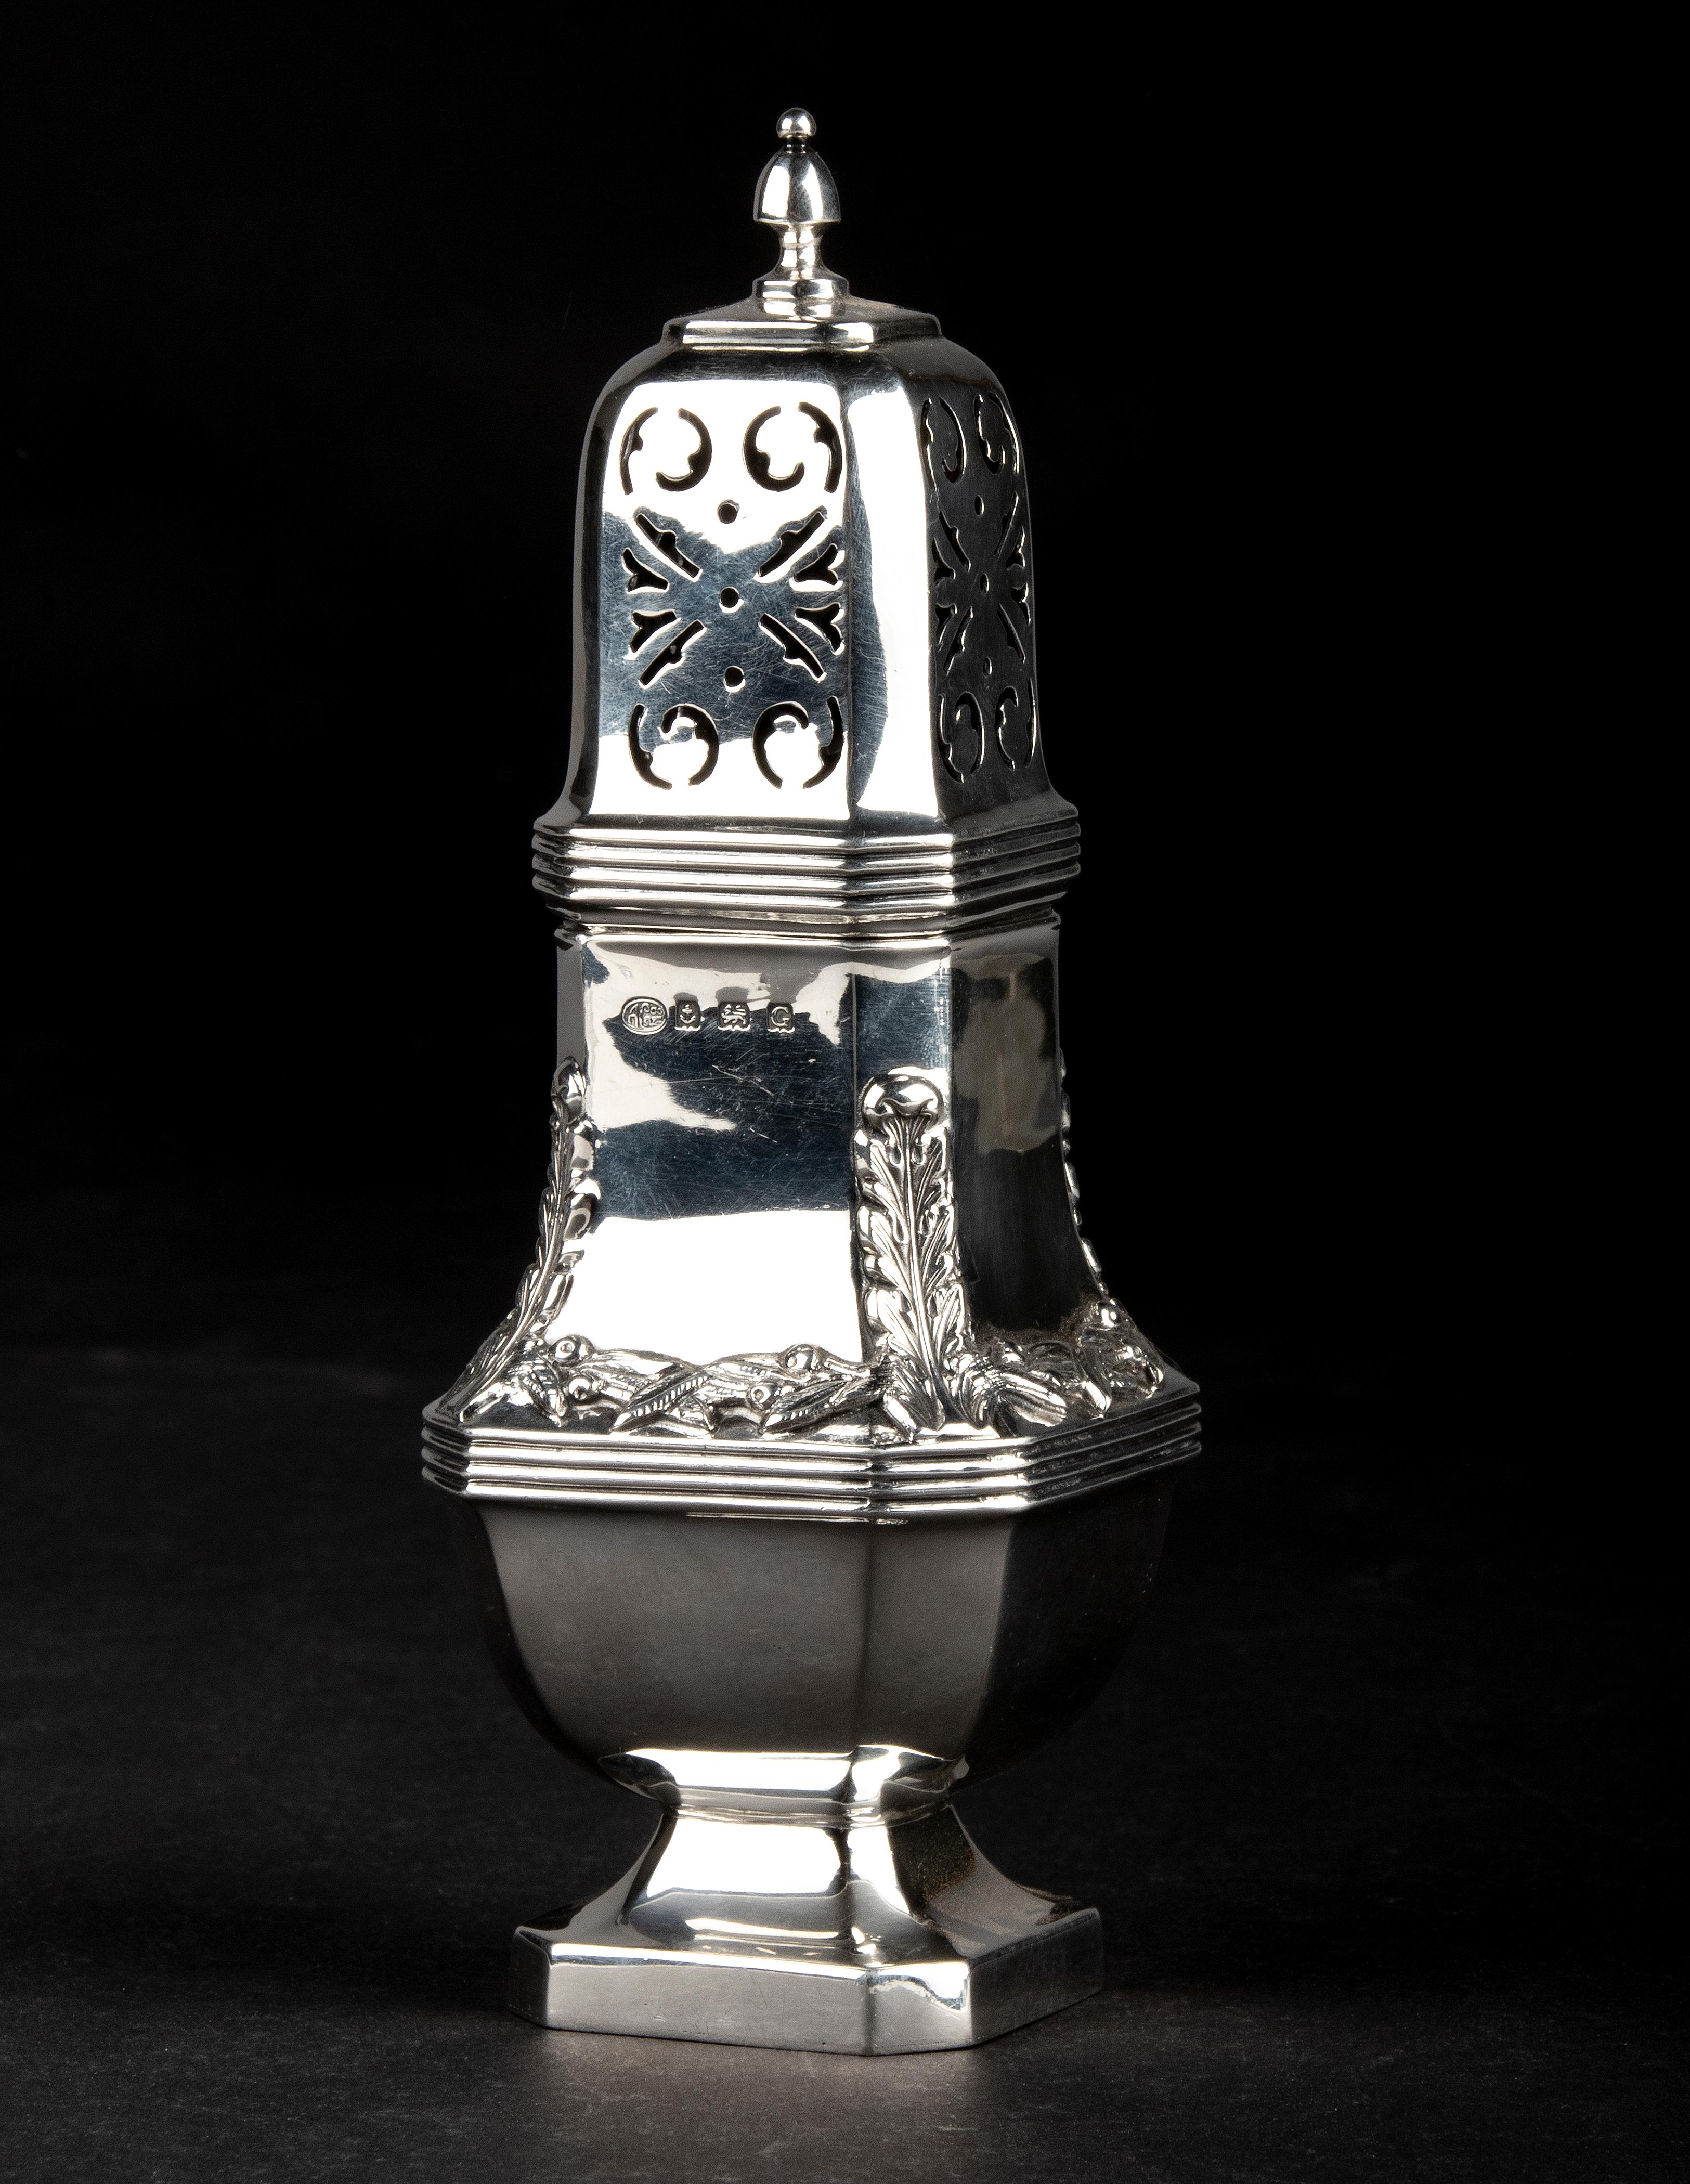 Beautiful Sterling silver sugar shaker. It is hallmarked Birmingham 1931, with makers mark Alexander Clark & Co. The spreader has a graceful design with beautiful ornaments. It is in good condition.